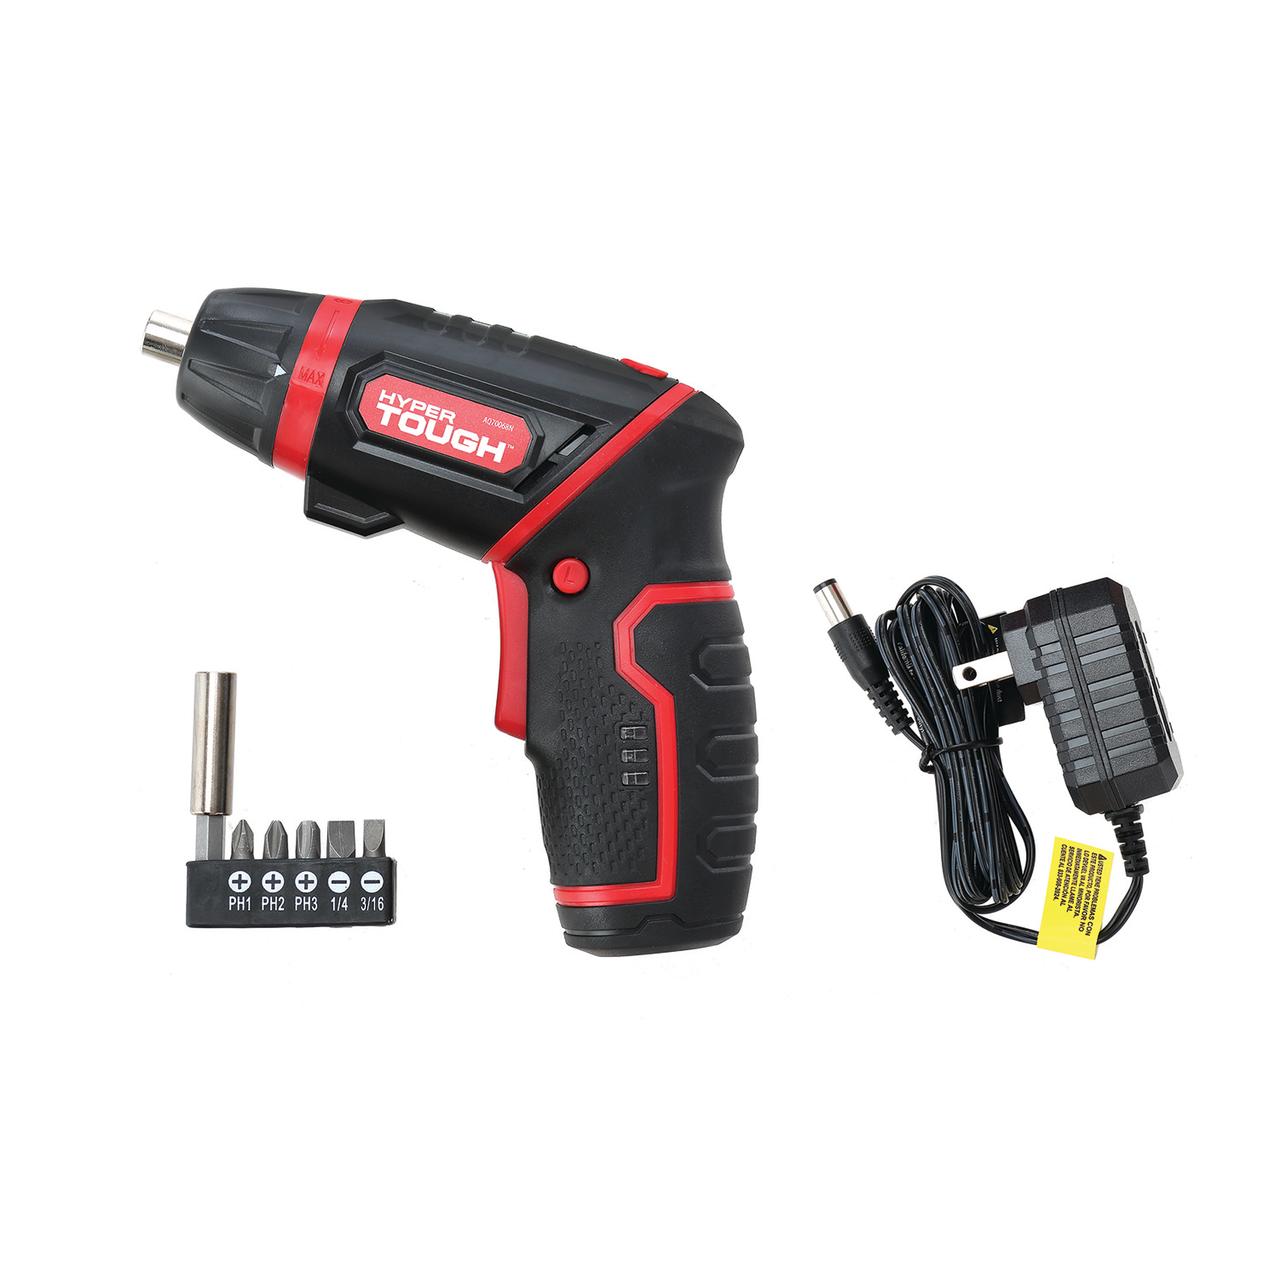 Hyper Tough 4V Max Lithium-Ion Cordless Rotating Power Screwdriver 1/4 inch Size with Charger, Rotating Handle, LED Light, Magnetic Bit Holder & Bits - image 1 of 18